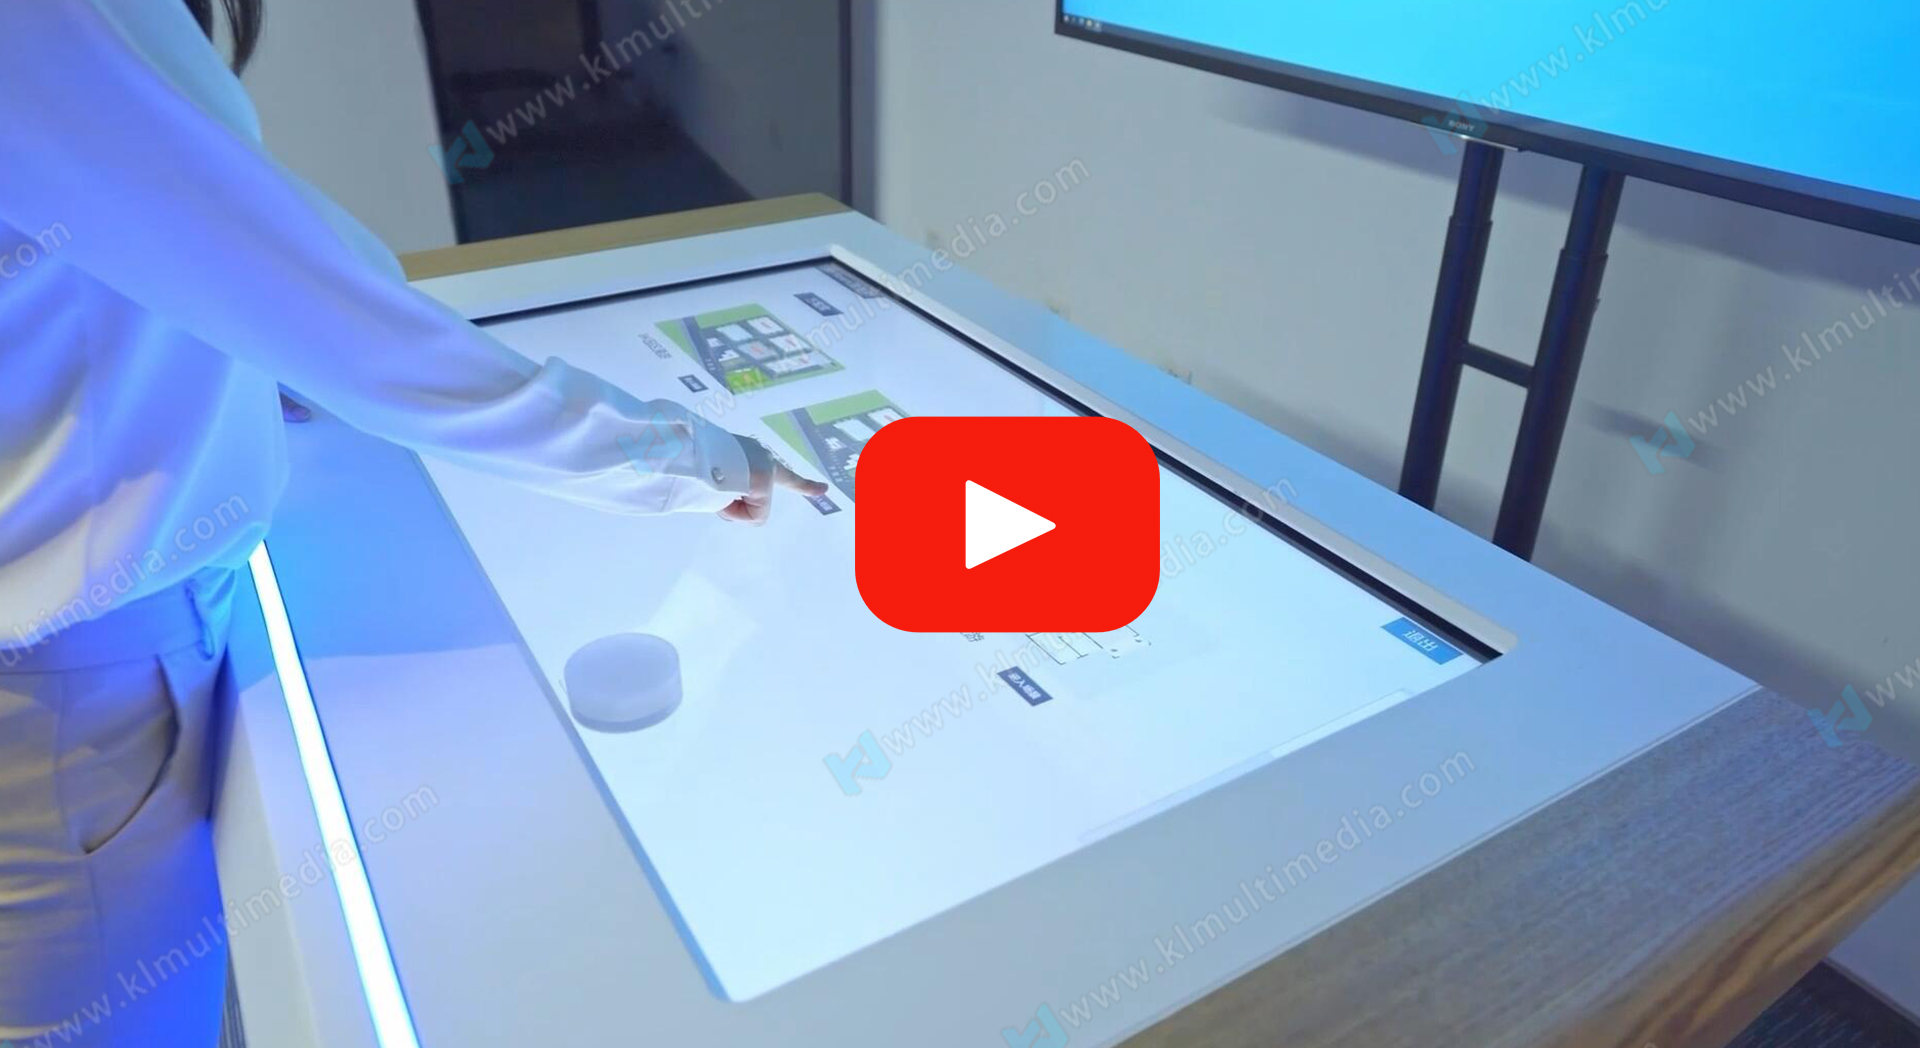 Tangible 3D Tabletops